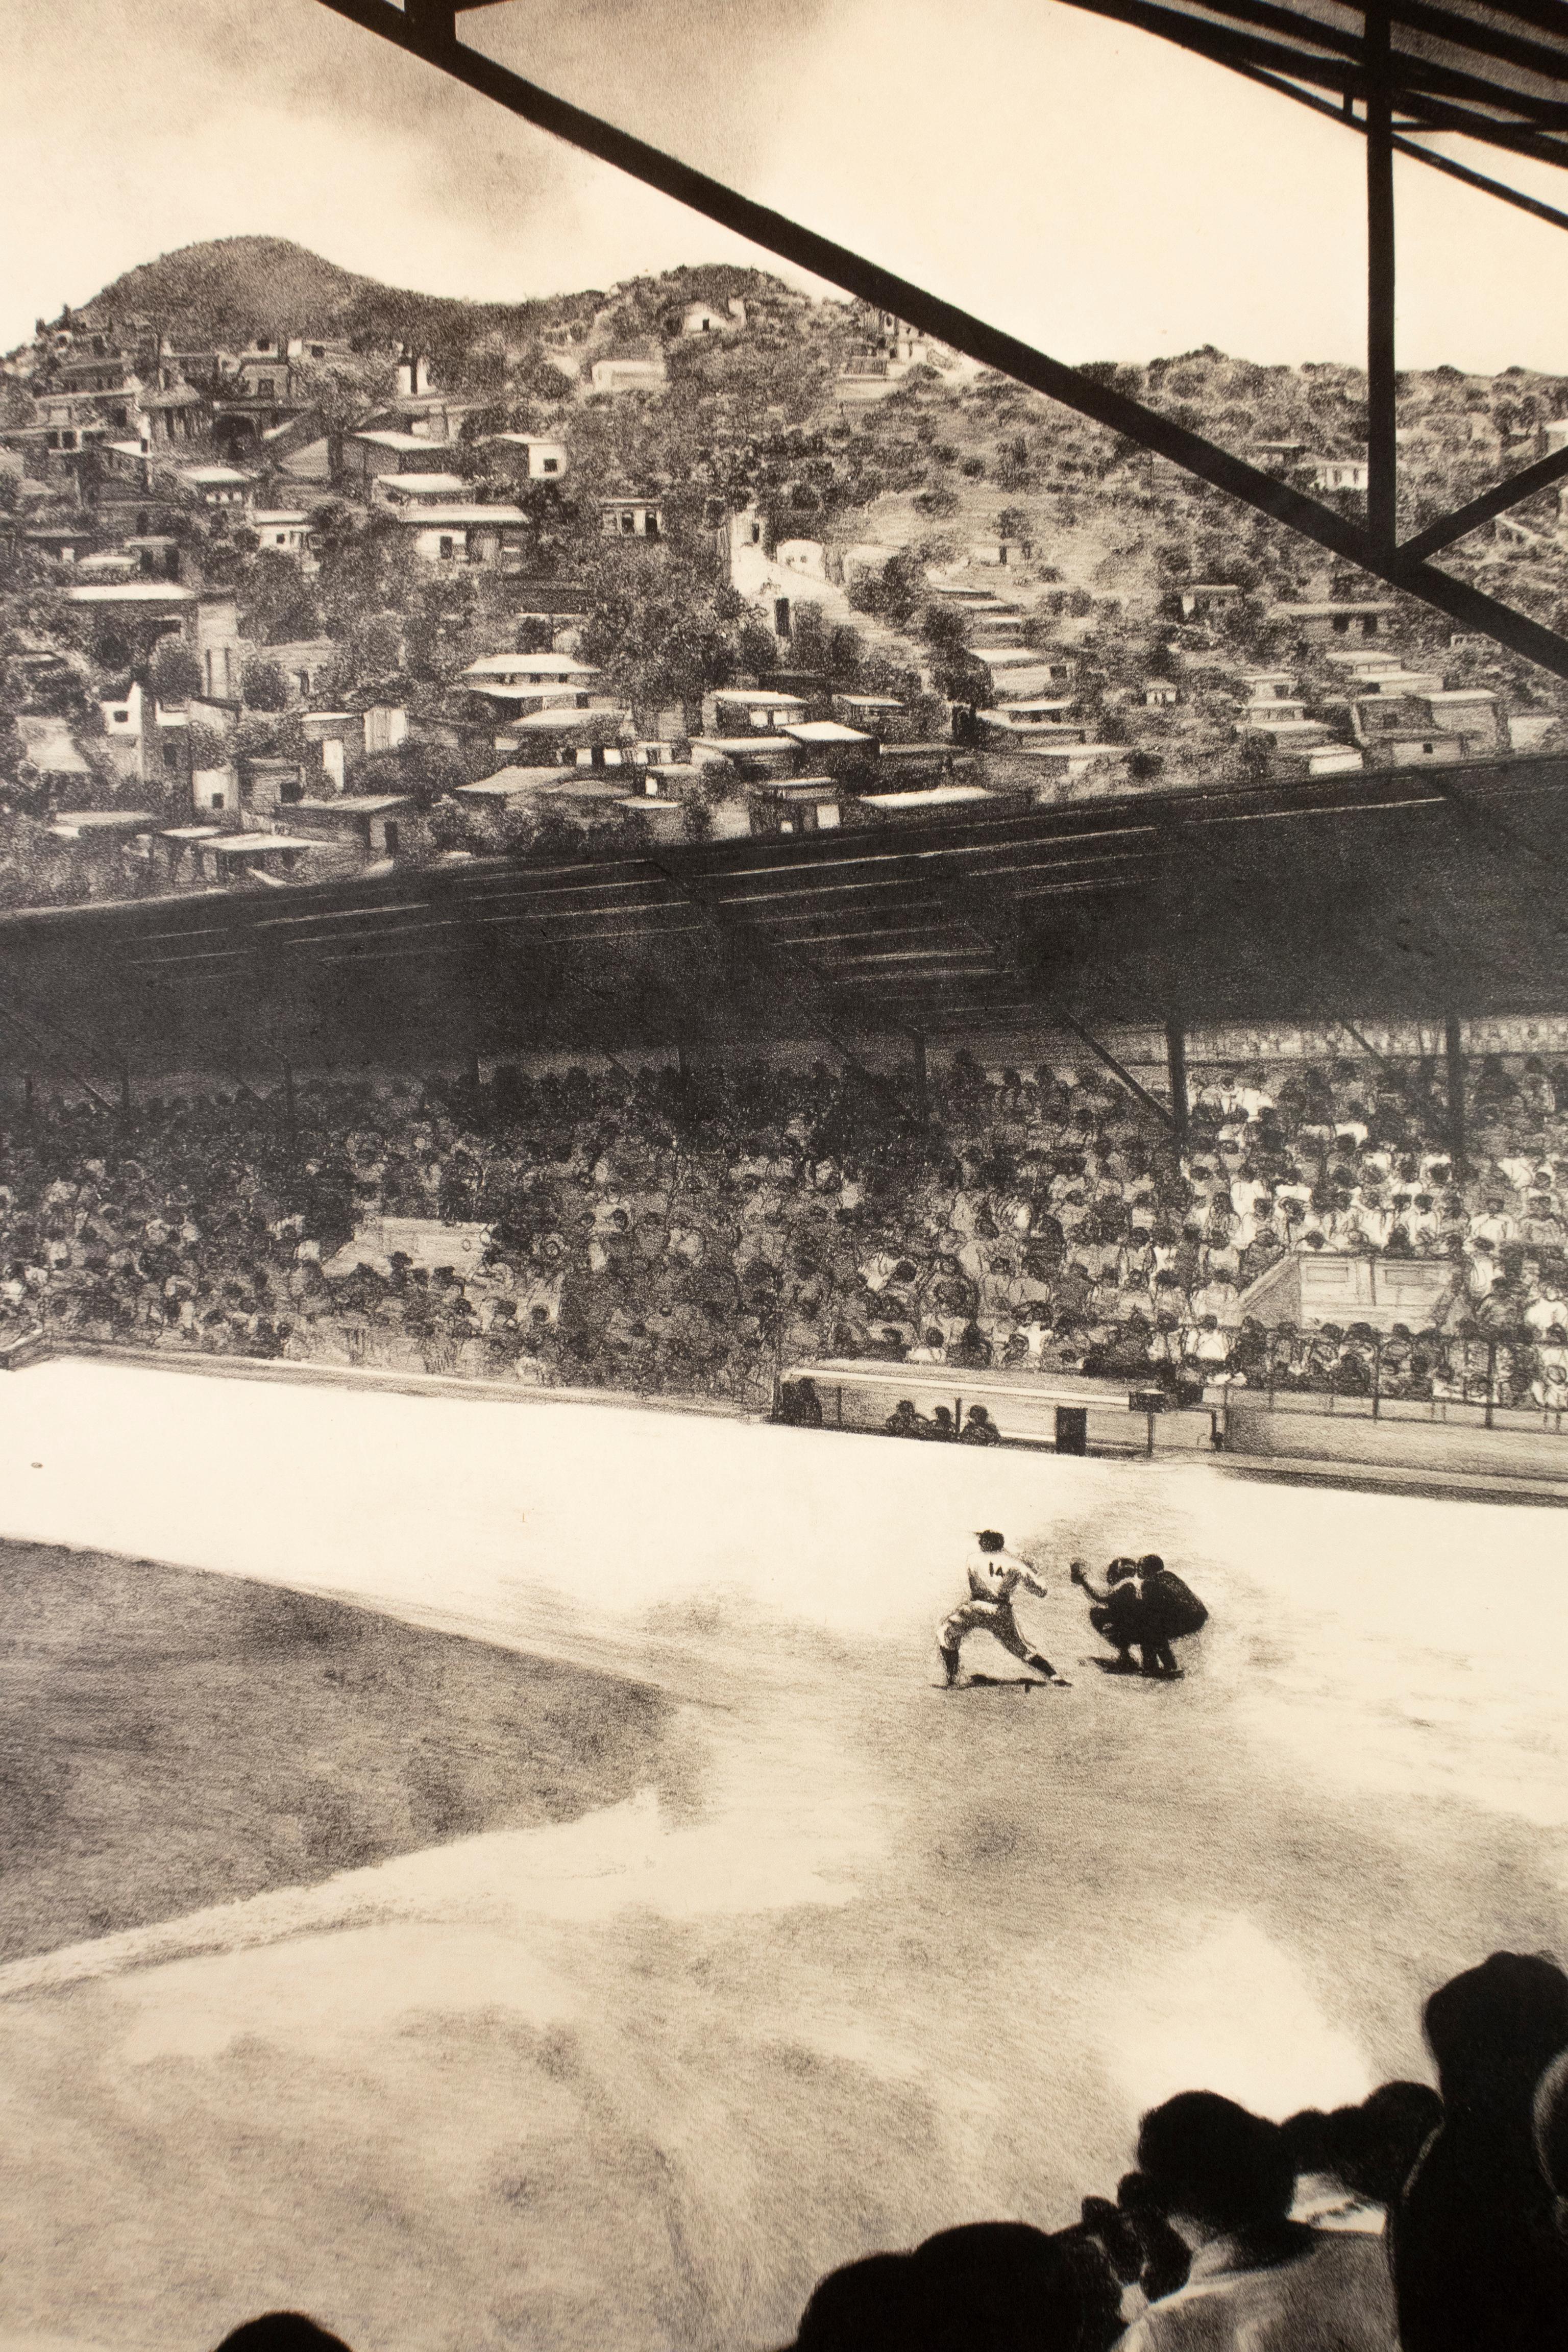 Baseball Game: realist large-scale black and white drawing of sports game  - Contemporary Print by Michele Zalopany